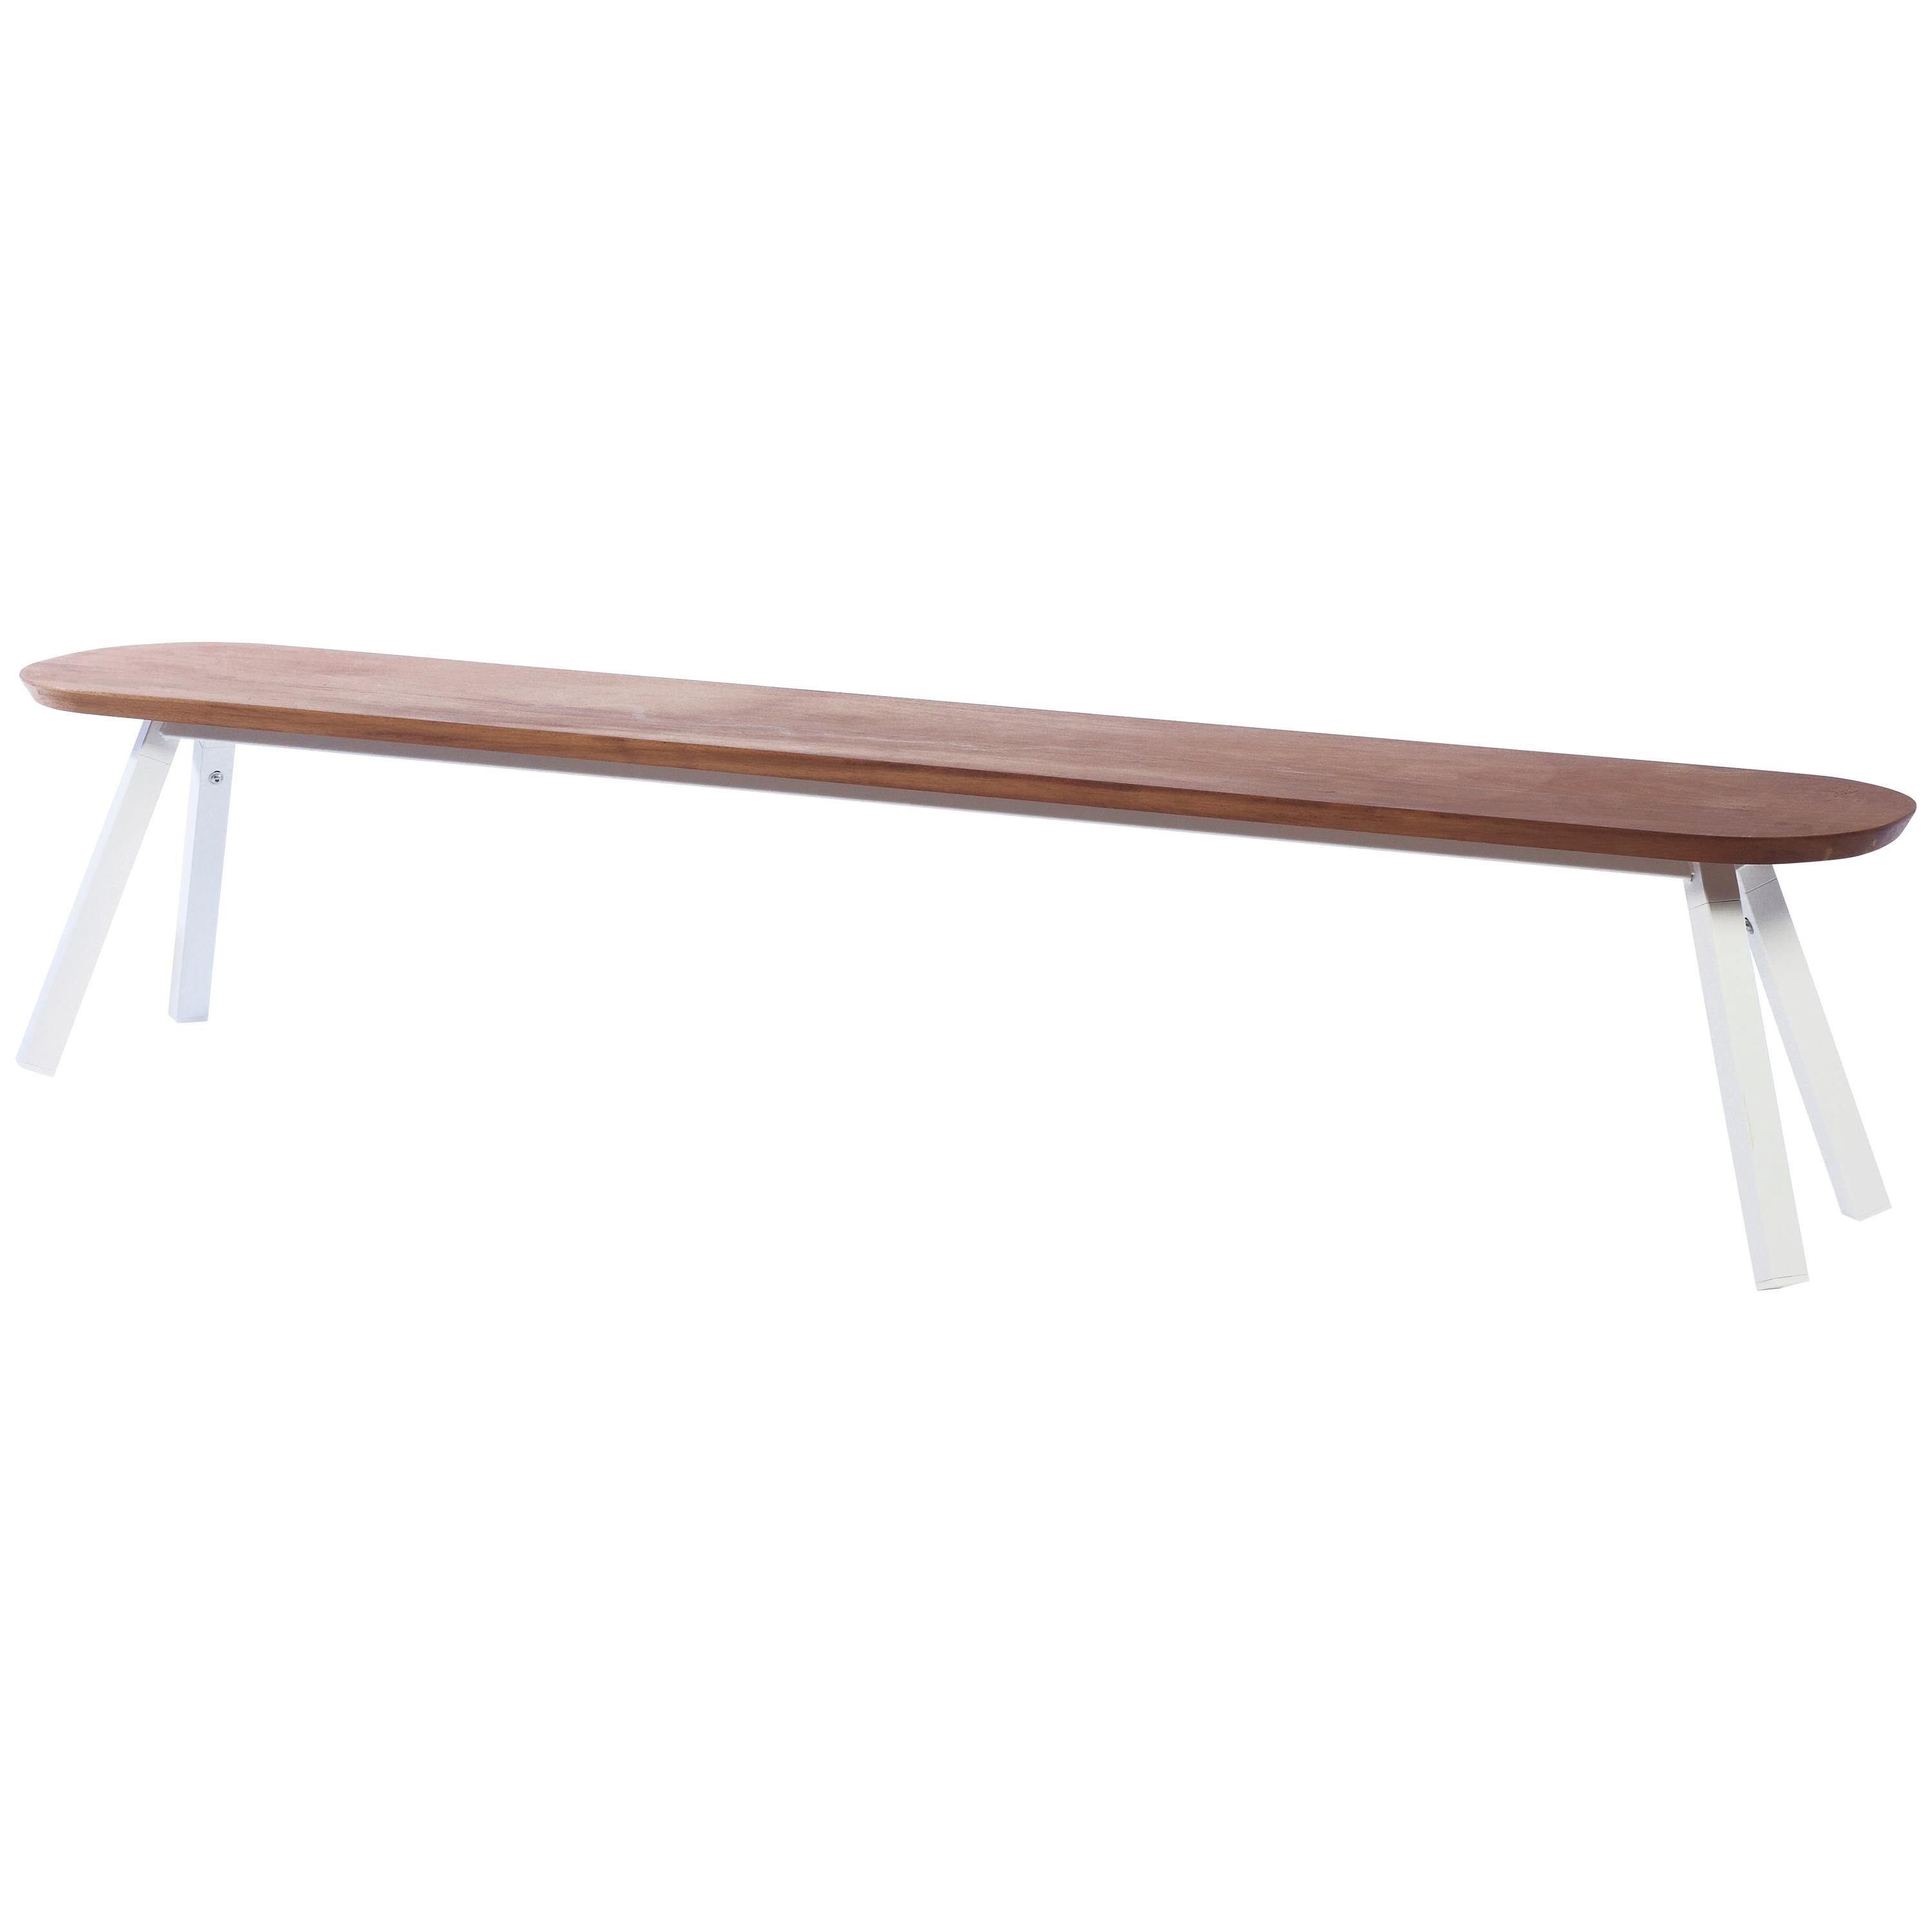 RS Barcelona You and Me 220 Bench in Iroko with White Legs by A.P.O. For Sale